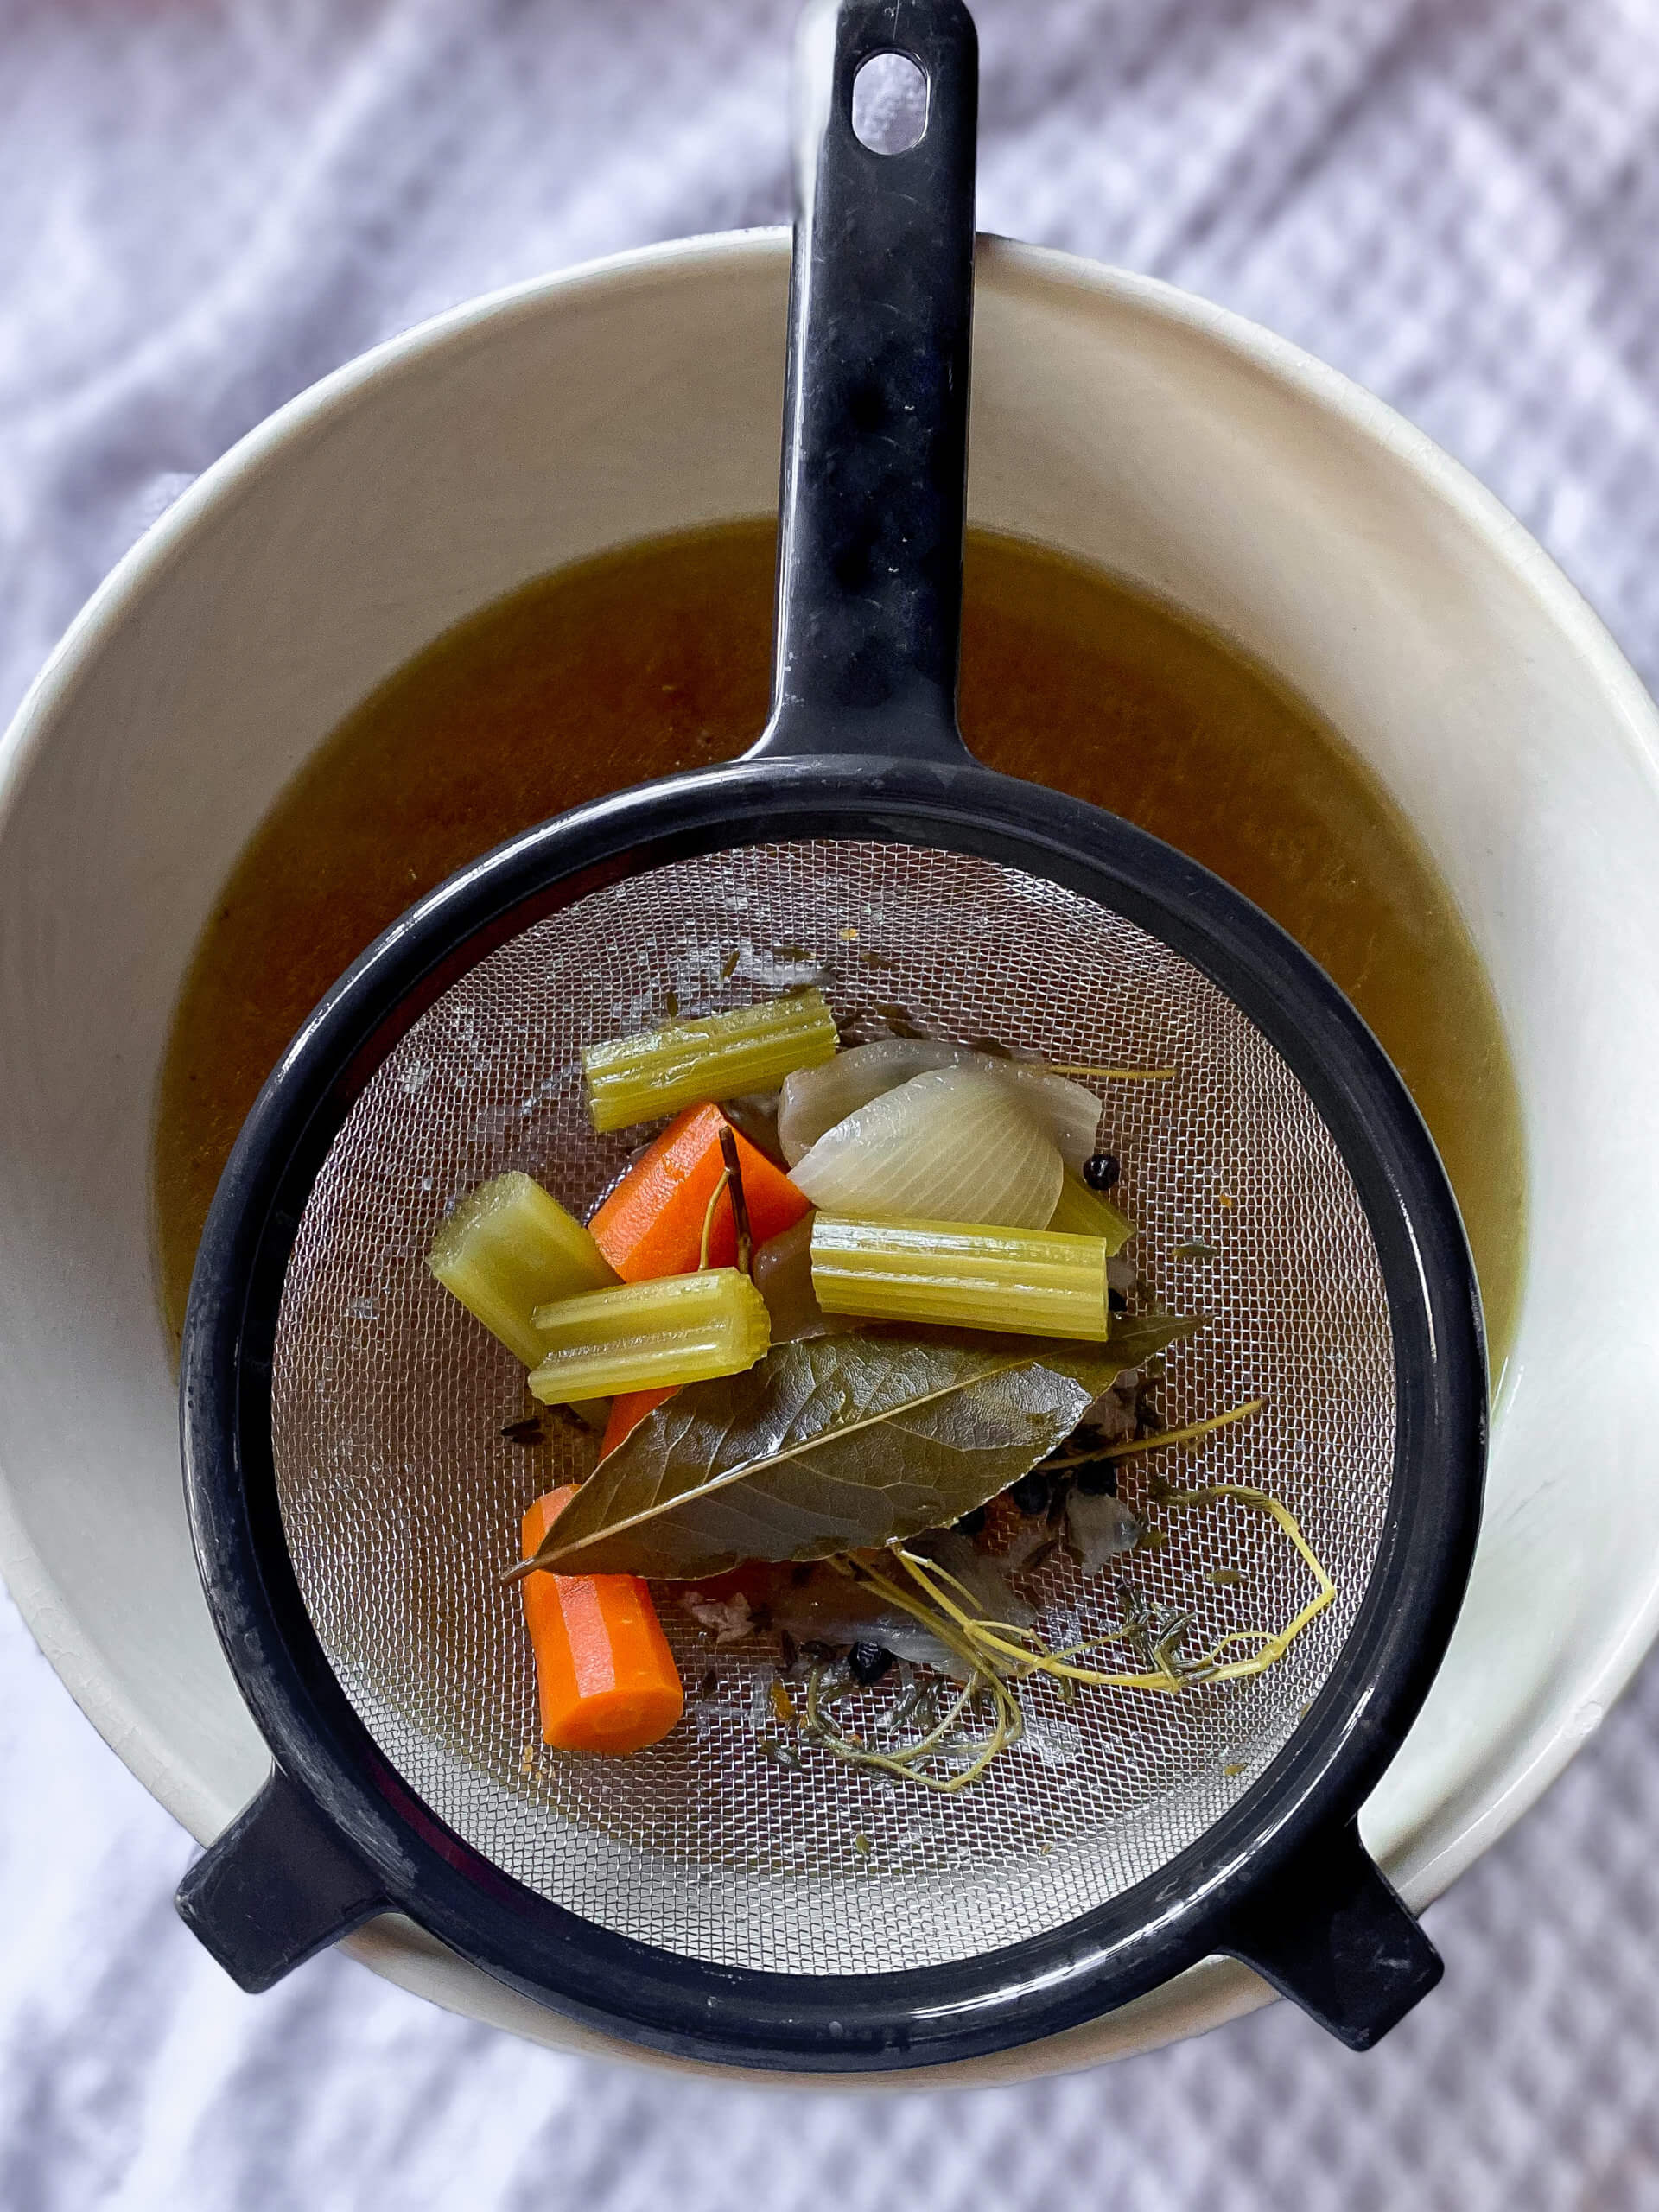 How to make chicken stock